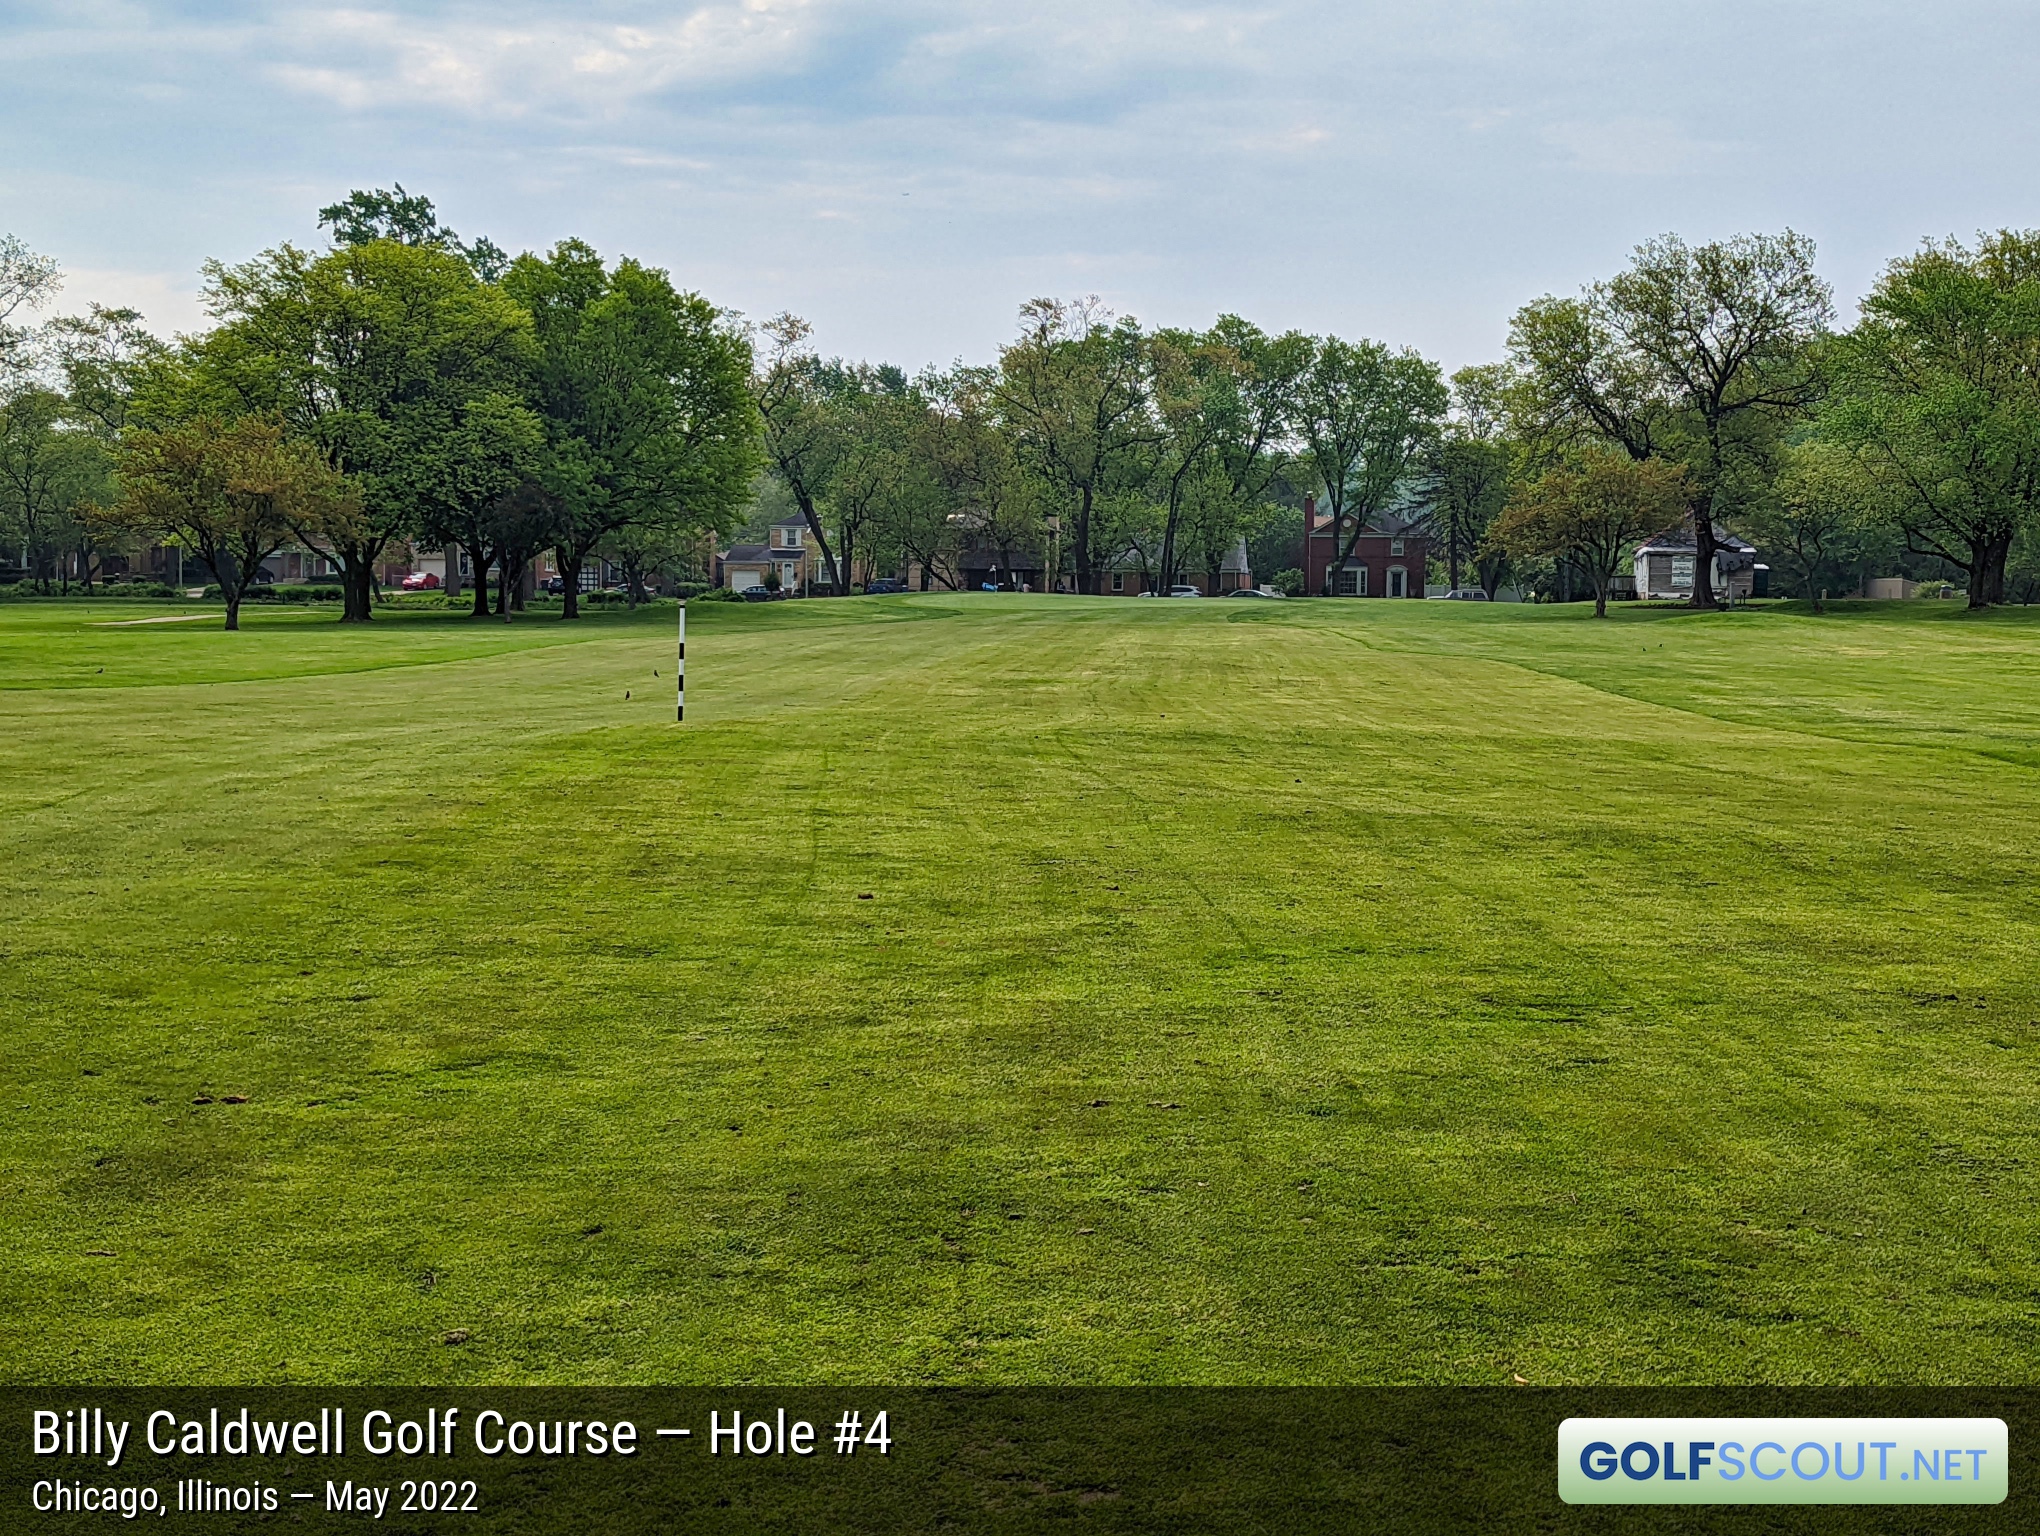 Photo of hole #4 at Billy Caldwell Golf Course in Chicago, Illinois. 